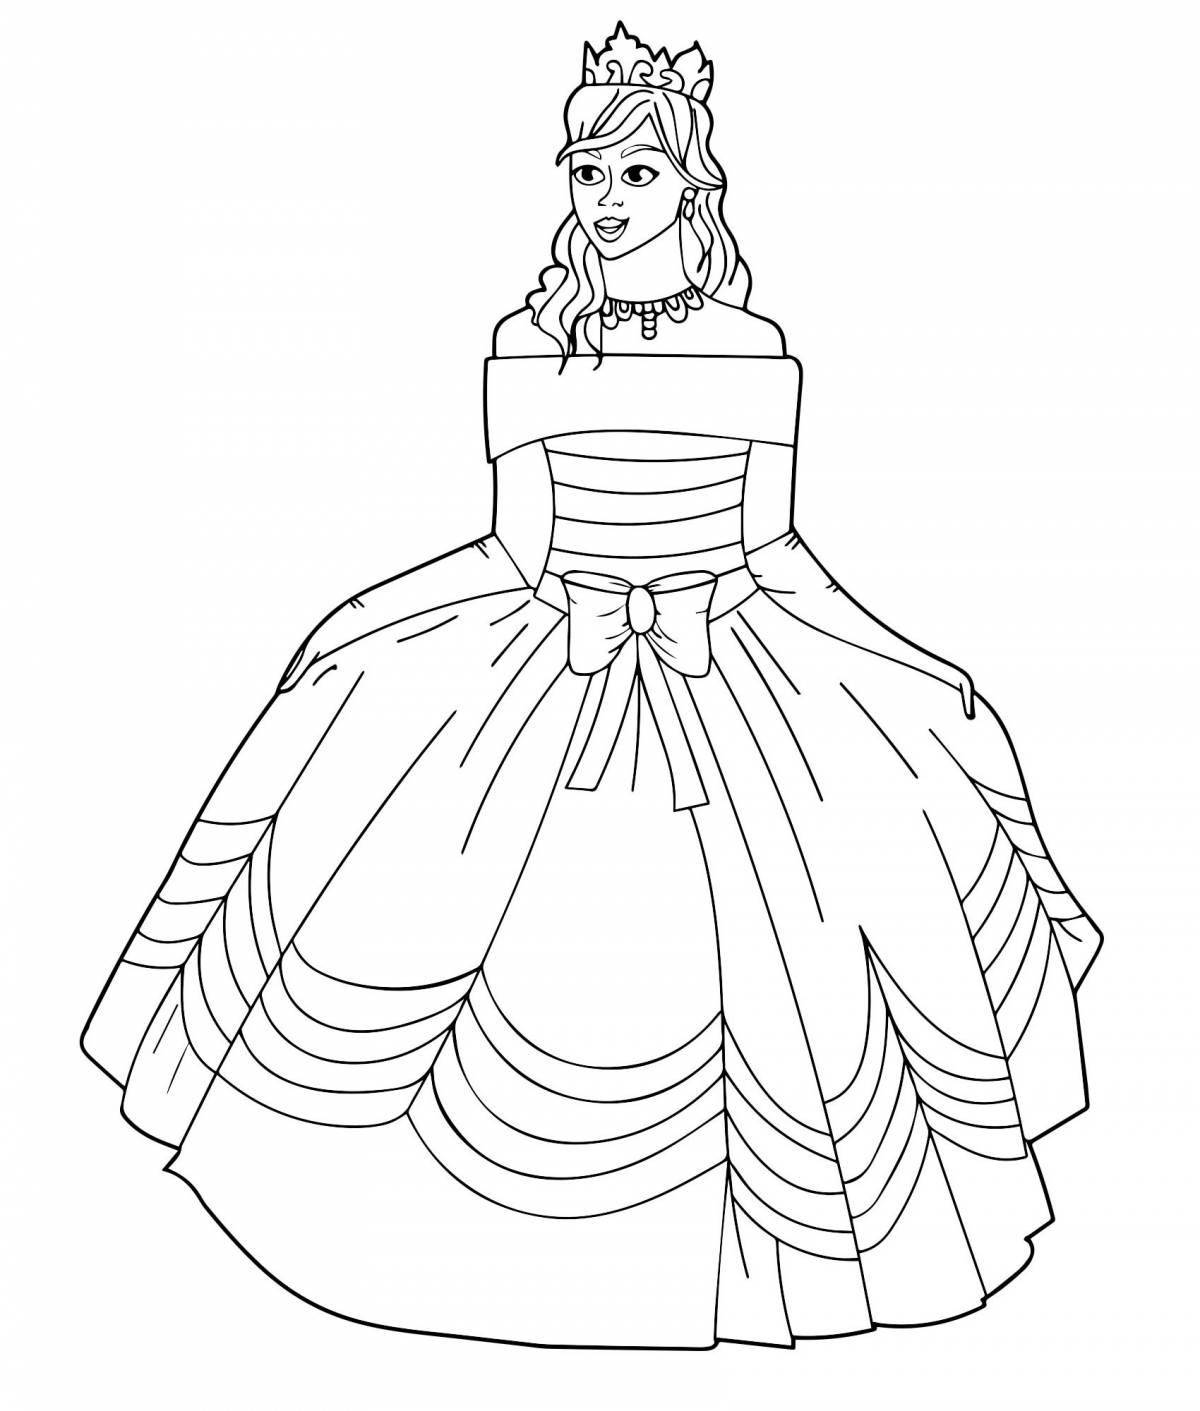 Charming ball gown coloring book